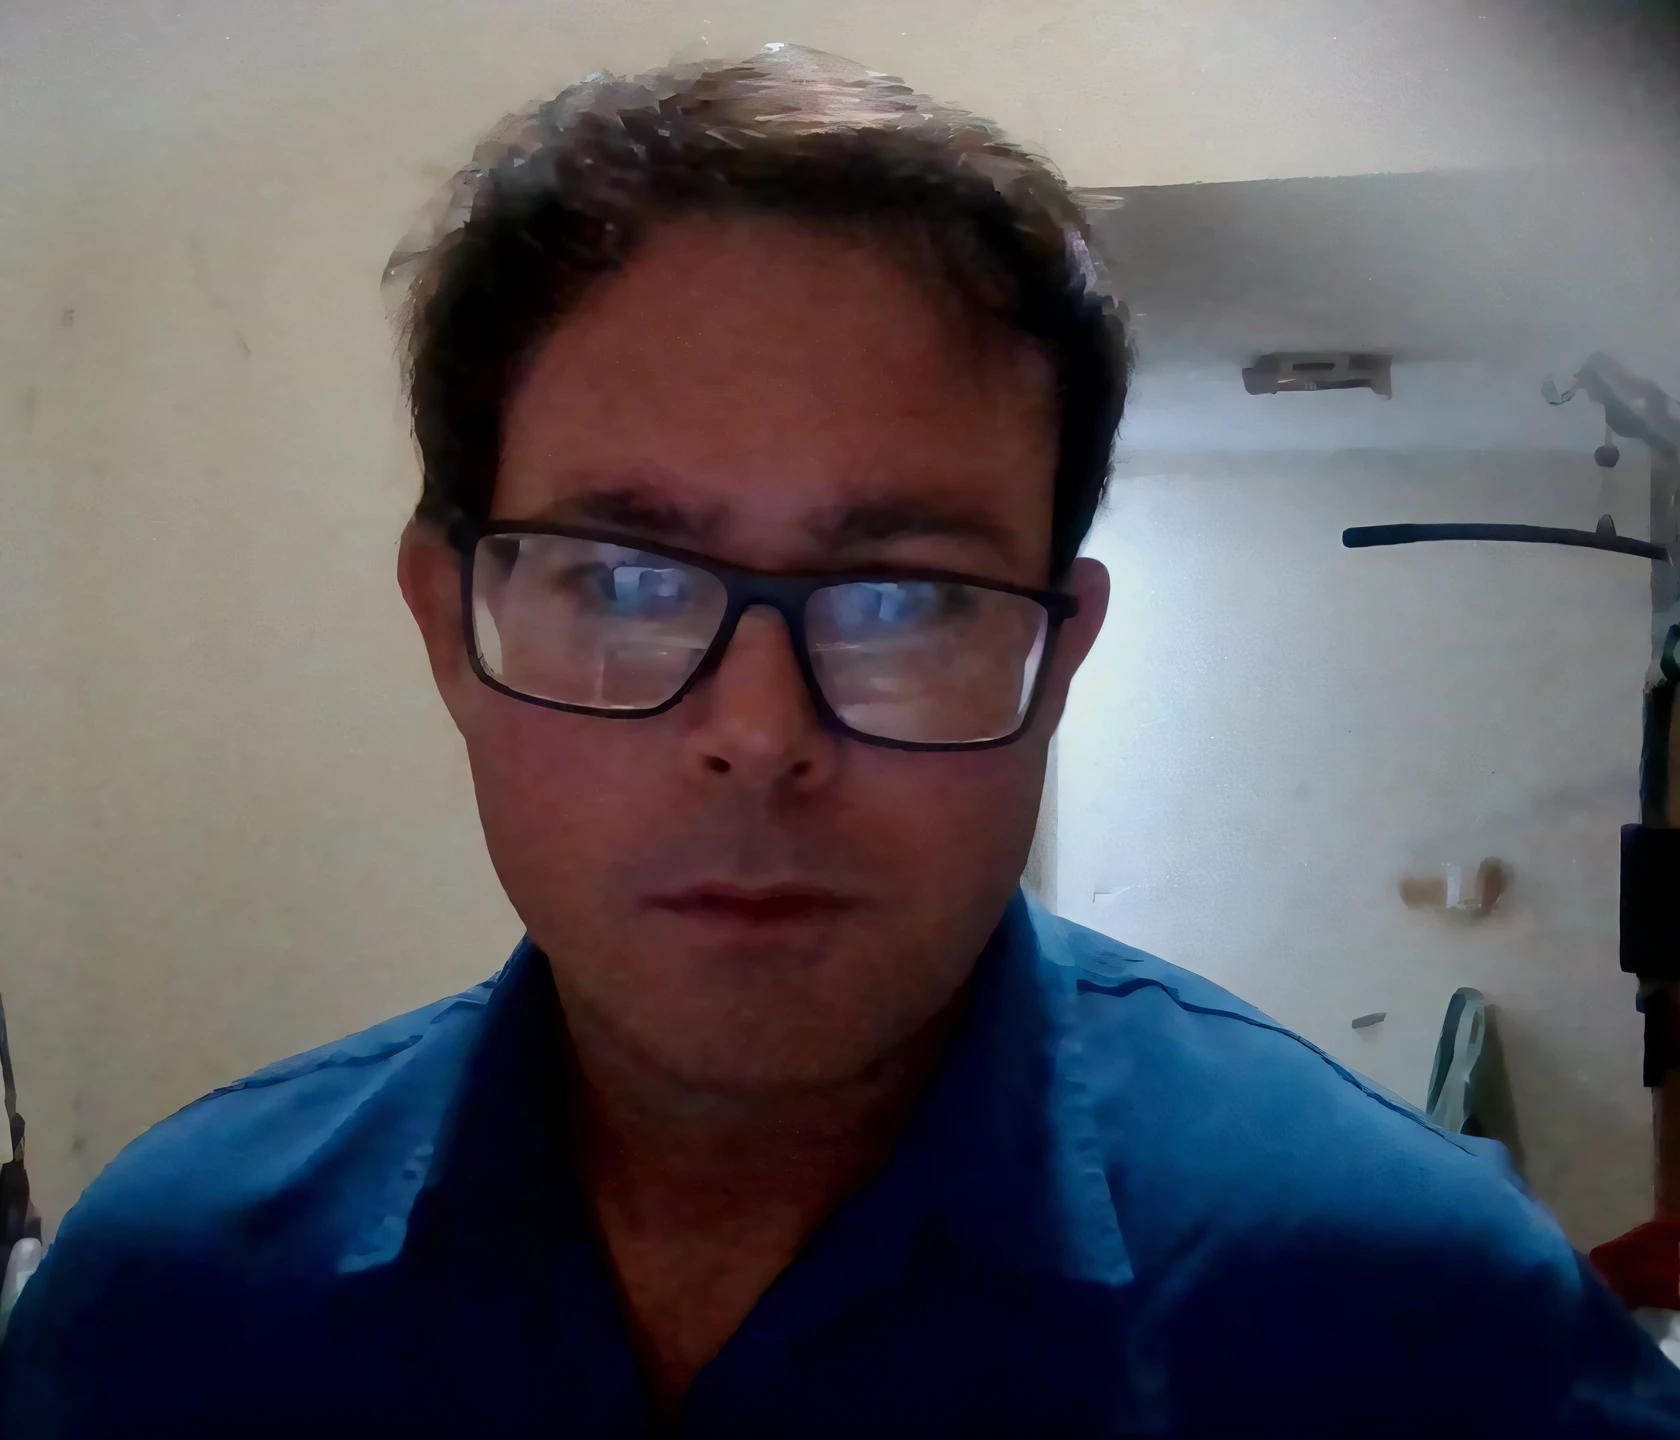 there is a man wearing glasses and a blue shirt, about 3 5 years old, with slight stubble, david rios ferreira, icaro carvalho, with nerdy glasses and goatee, 4 0 years old man, with glasses and goatee, (38 years old), 8k selfie photograph, selfie of a man, man with glasses, 38 years old